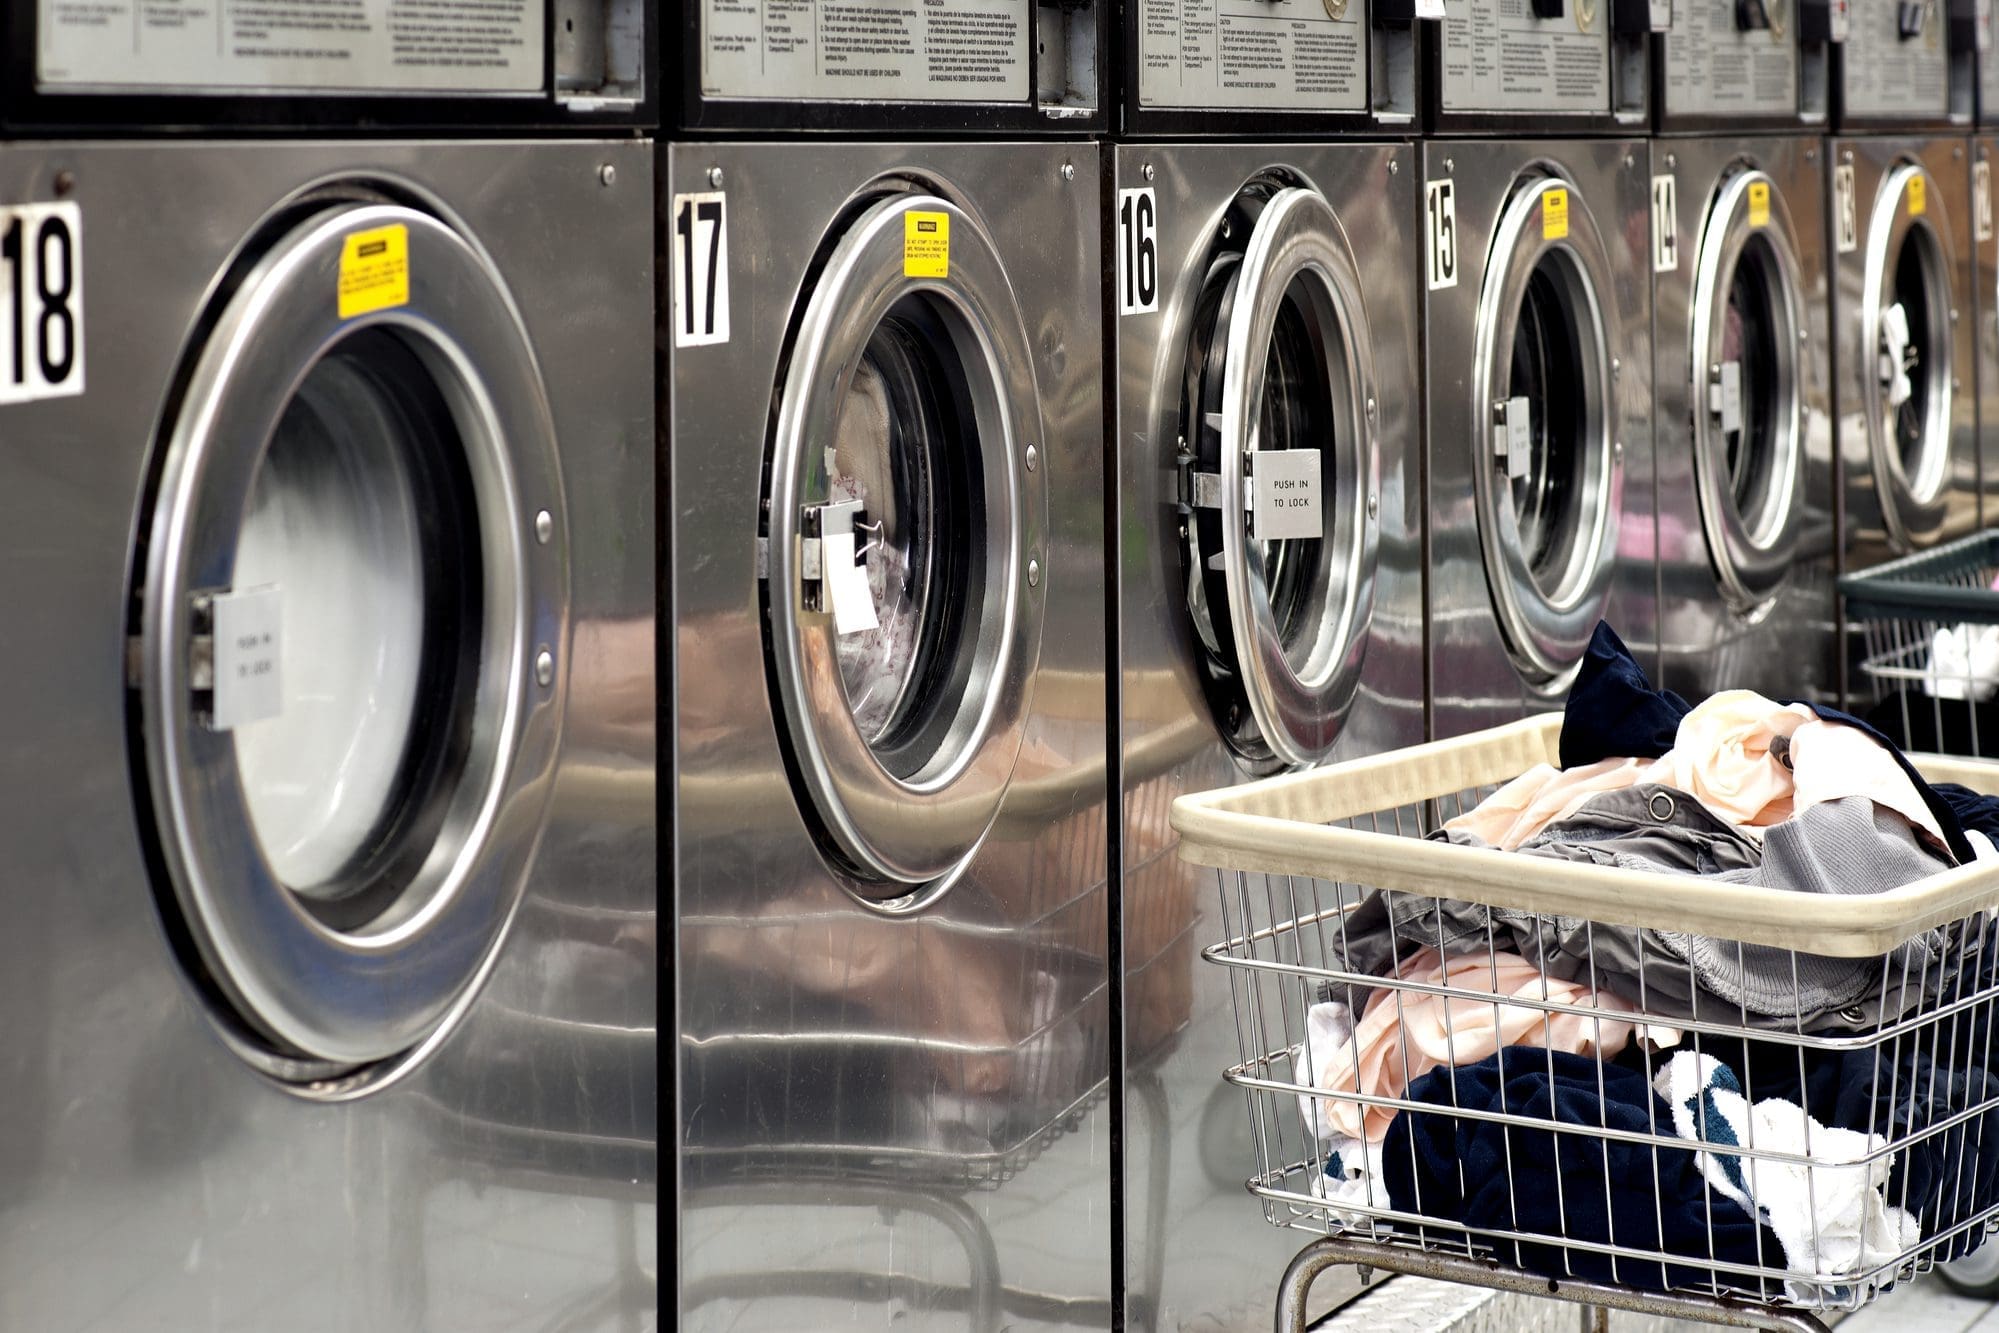 Row of washing machines in a laundromat with laundry carts in the foreground.